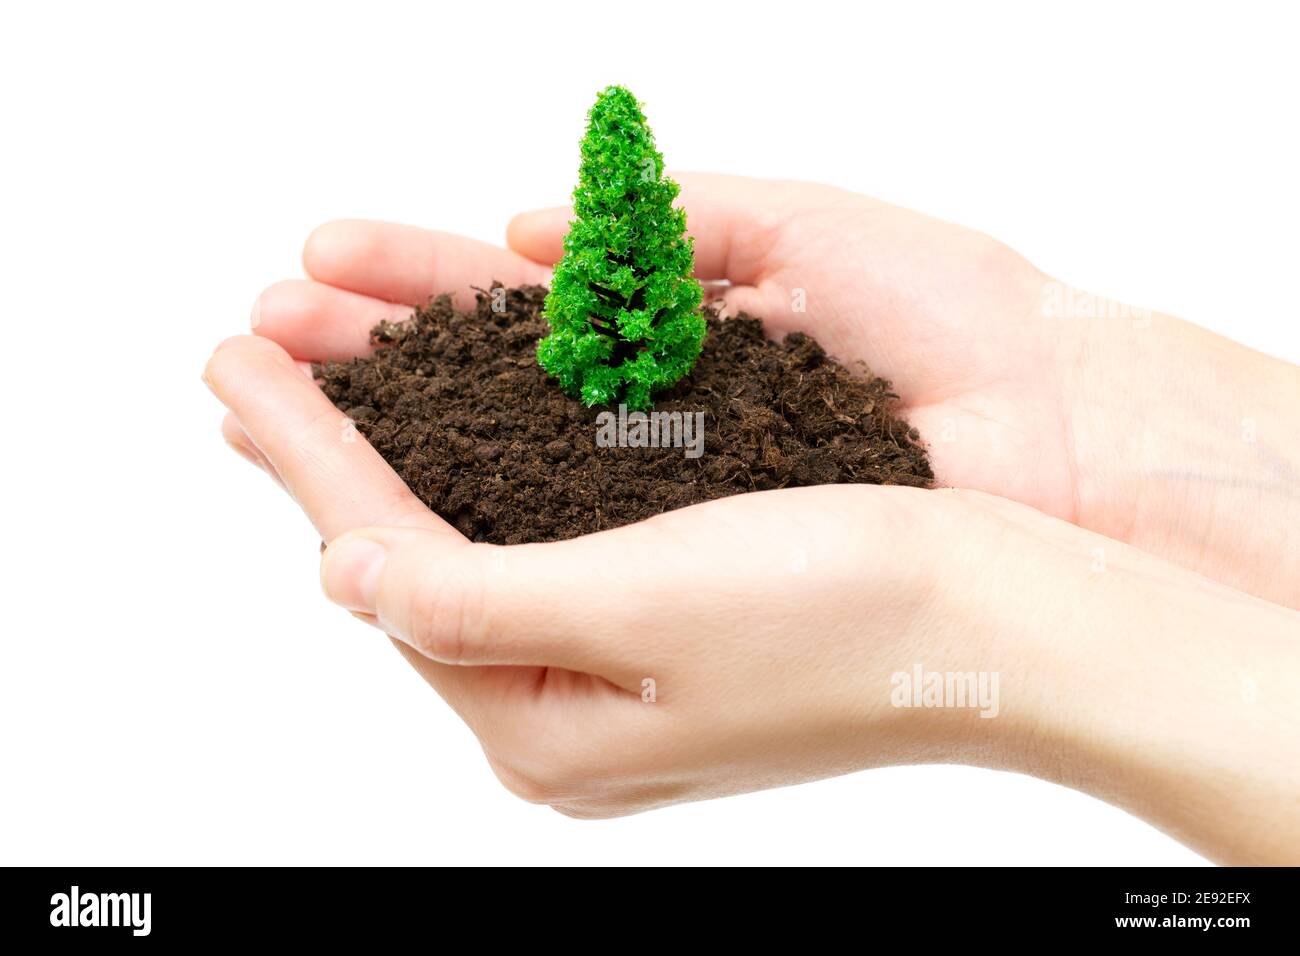 Female holding fertilized soil with a toy plastic tree. Parks care and protection concept. Stock Photo